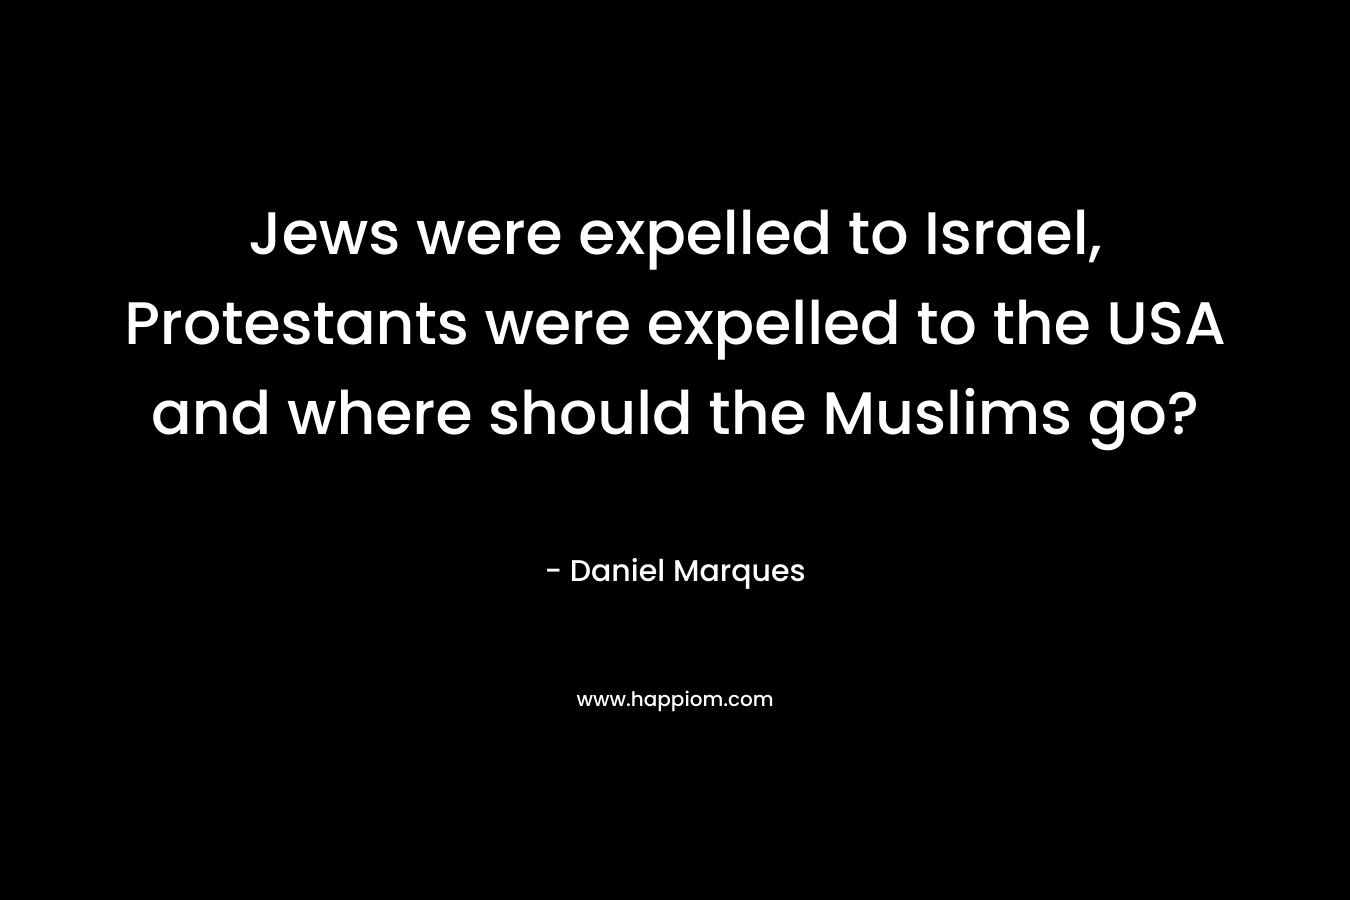 Jews were expelled to Israel, Protestants were expelled to the USA and where should the Muslims go?